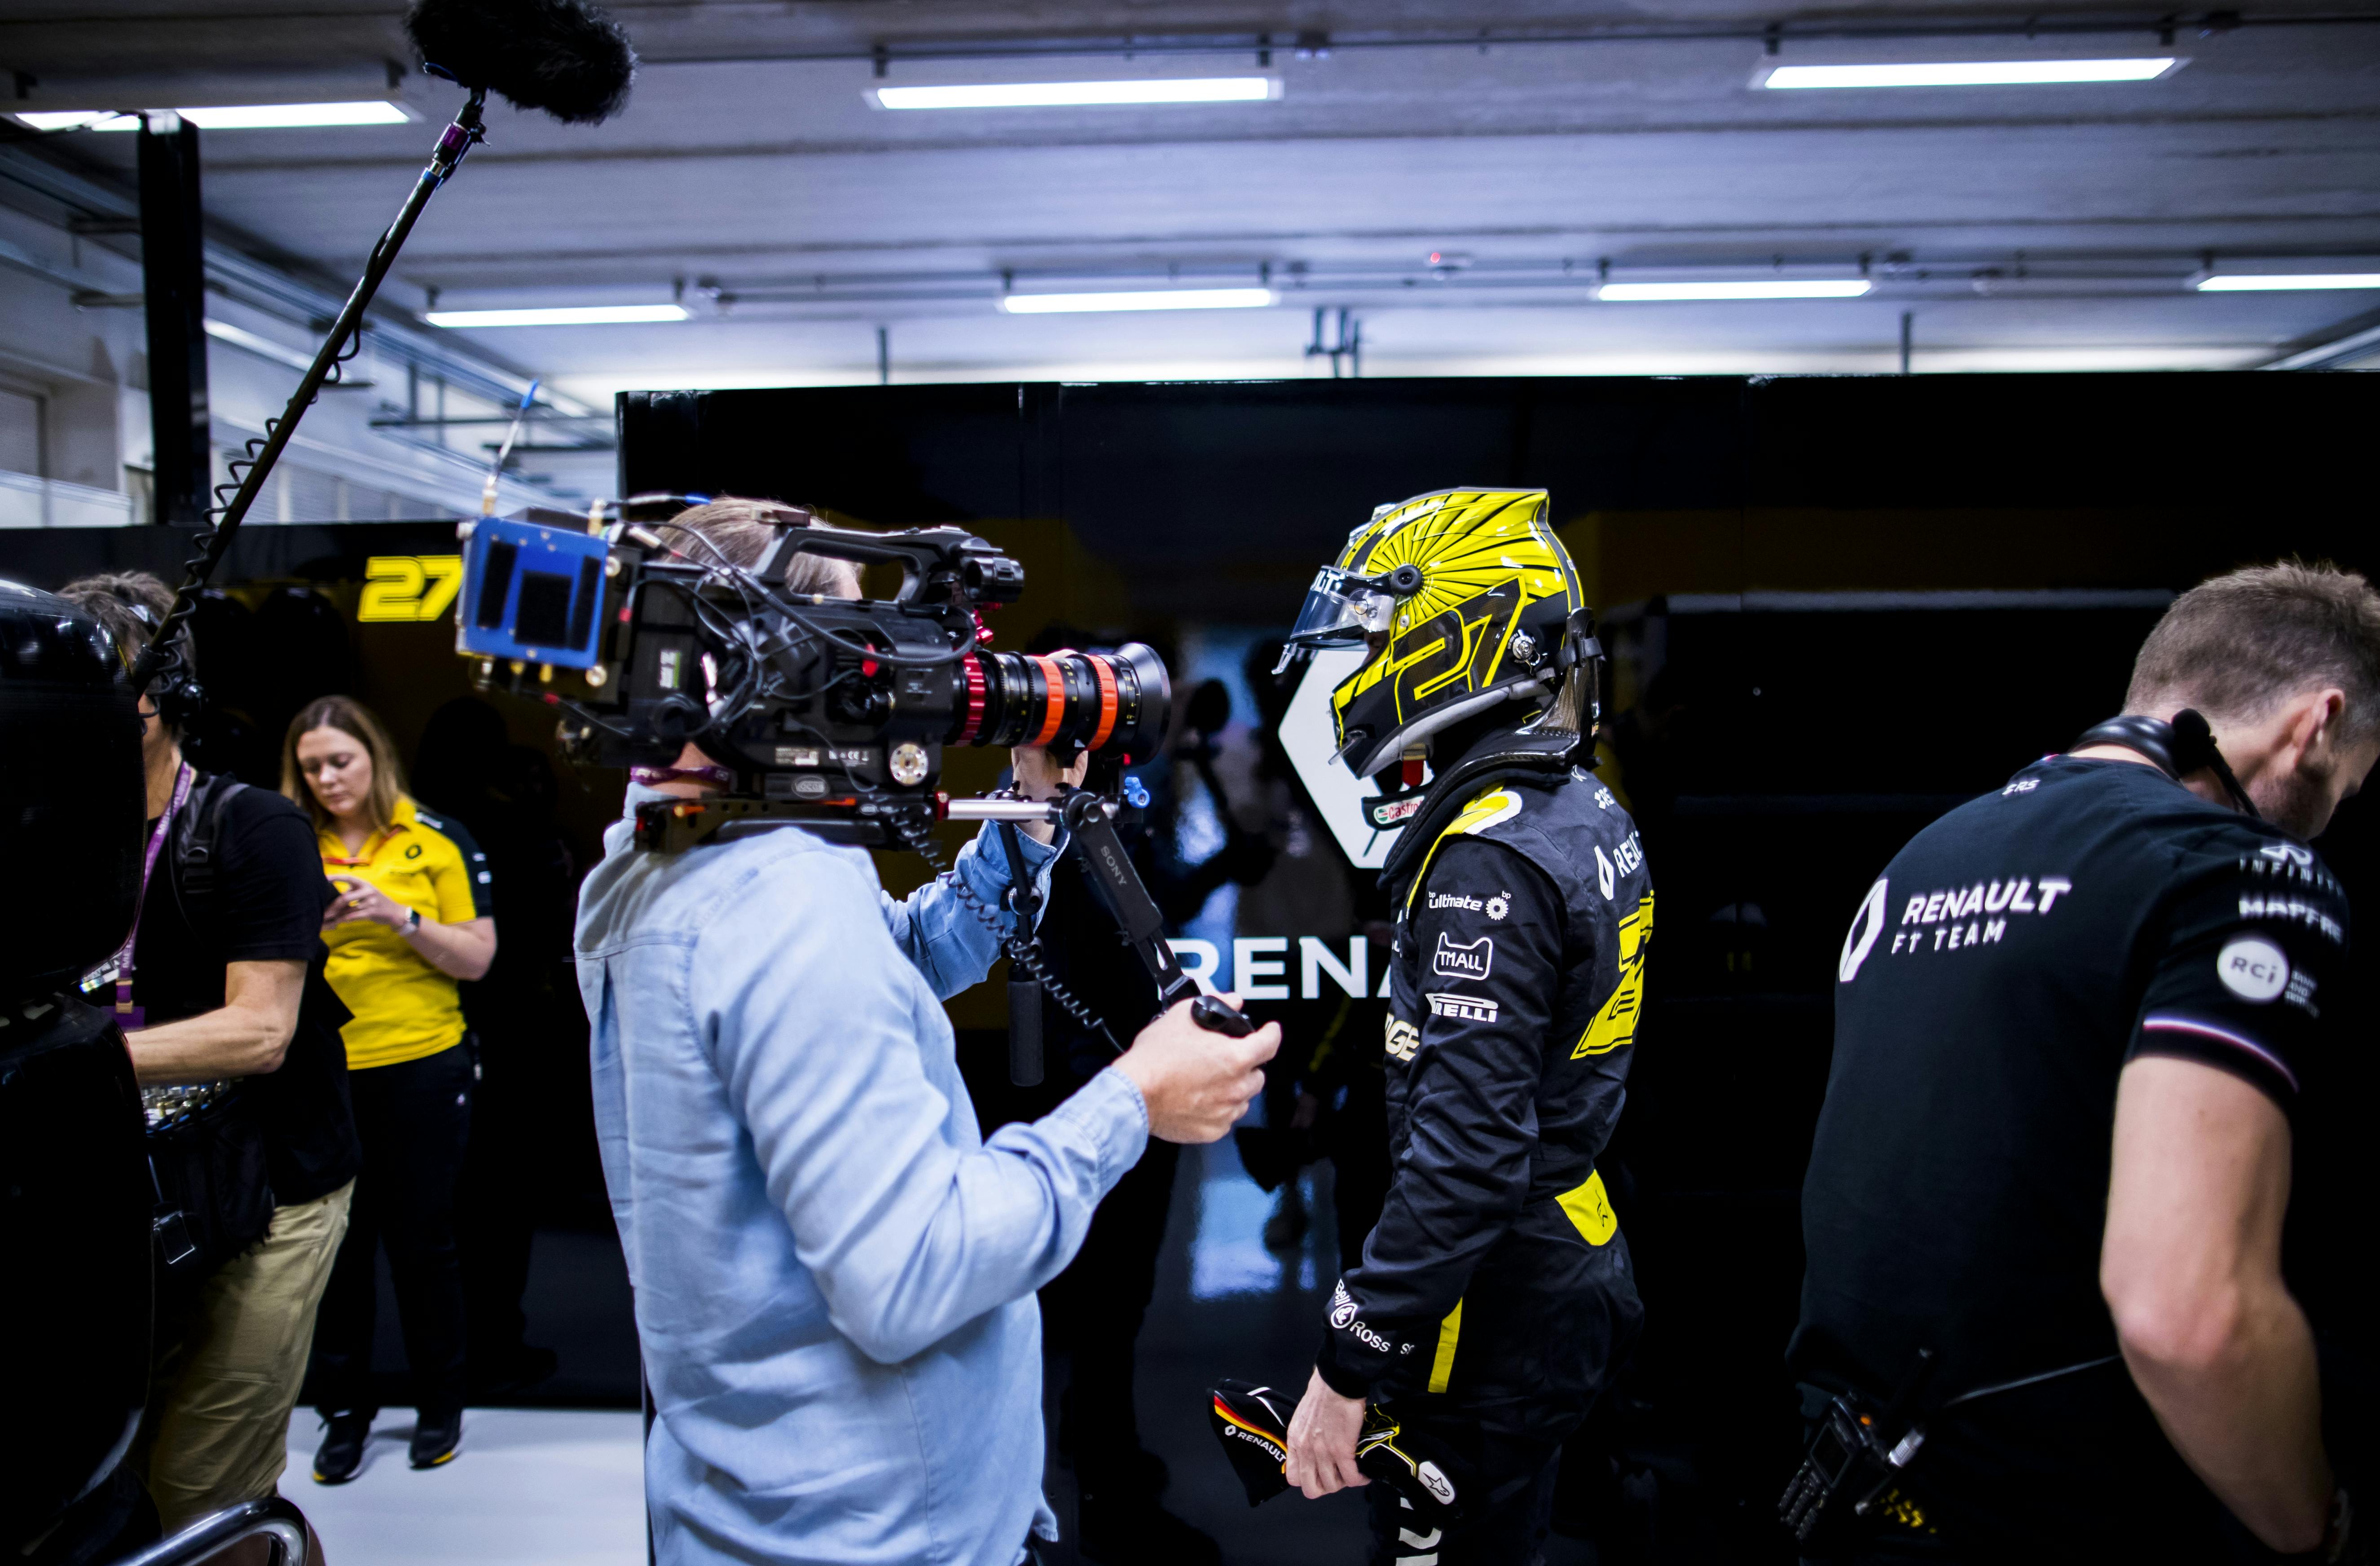 A cameraman interviews a race car driver dressed in black and yellow.